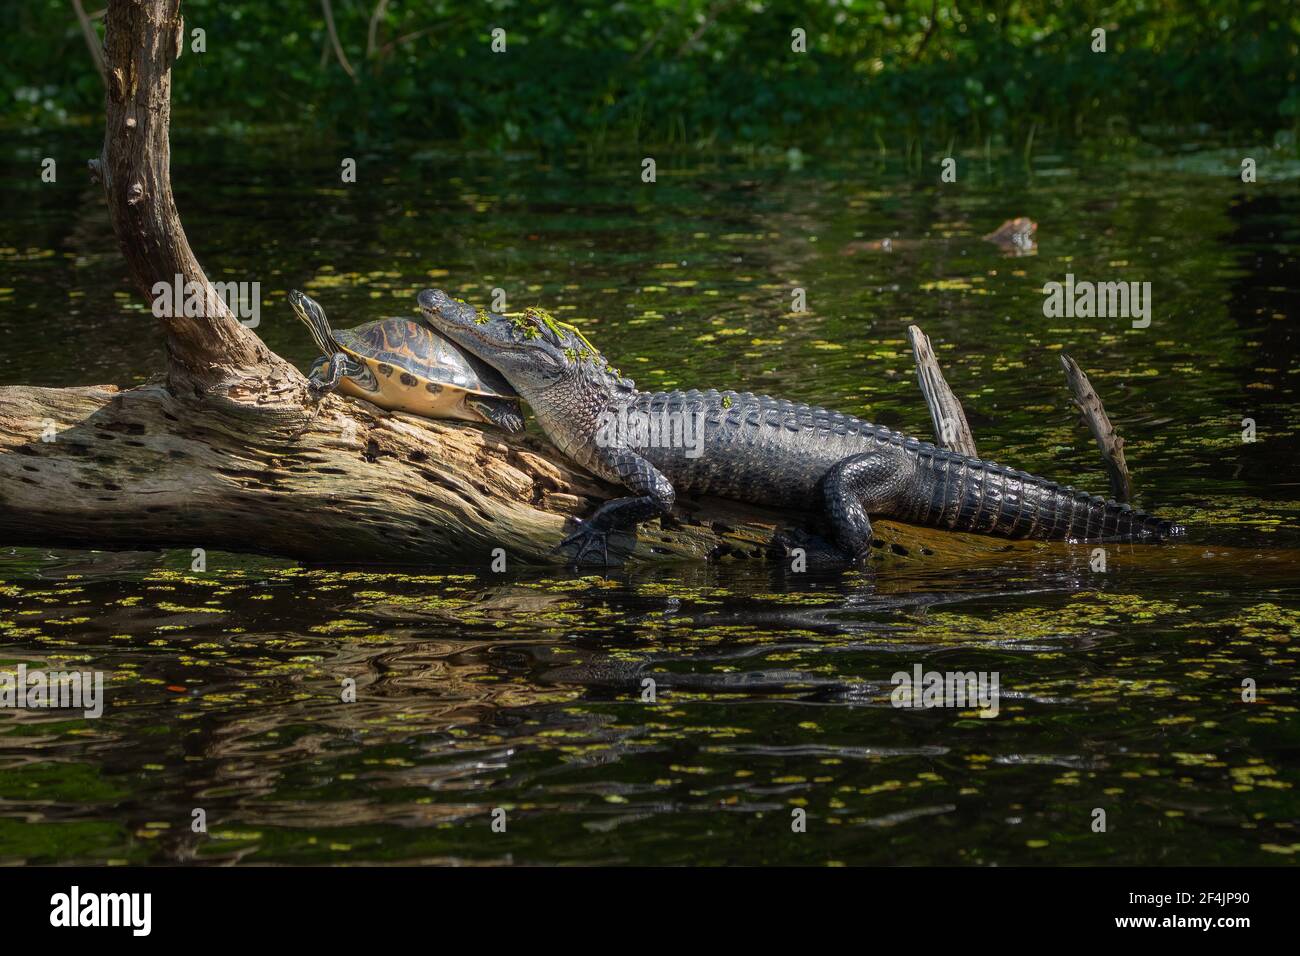 An alligator resting its head on the back of a turtle while sunning on a log. Stock Photo